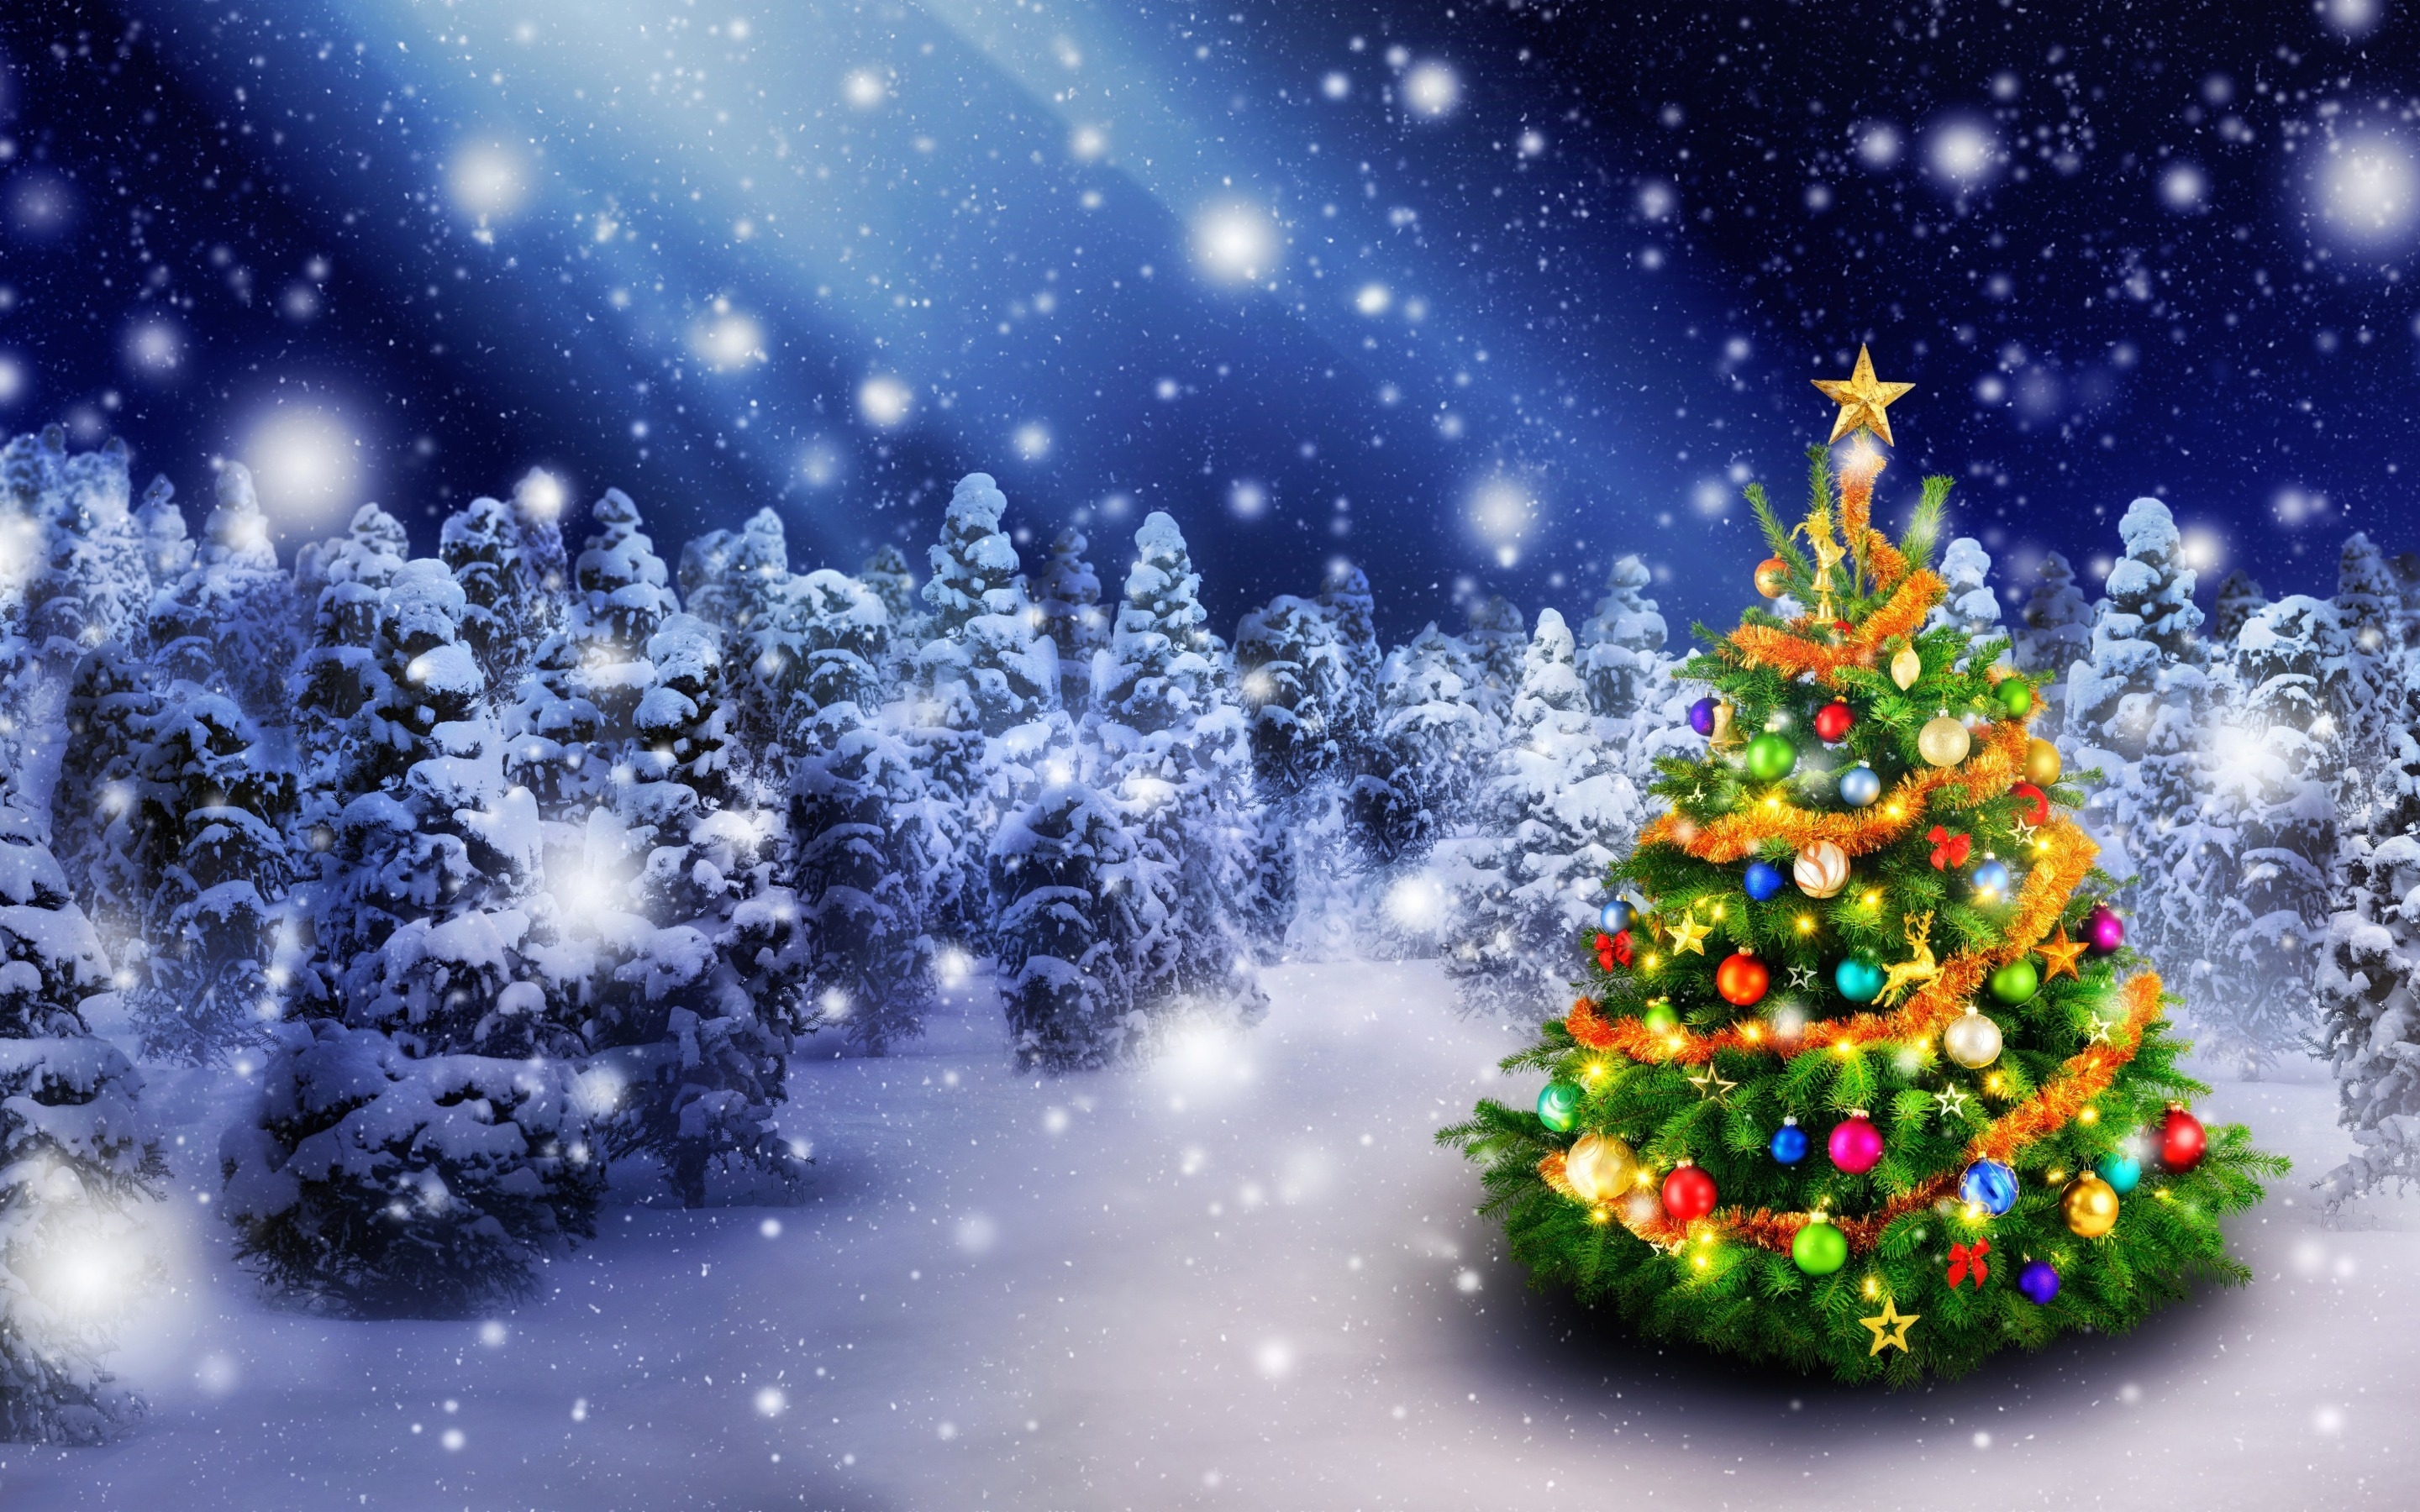 Christmas Tree in Snow for 2880 x 1800 Retina Display resolution